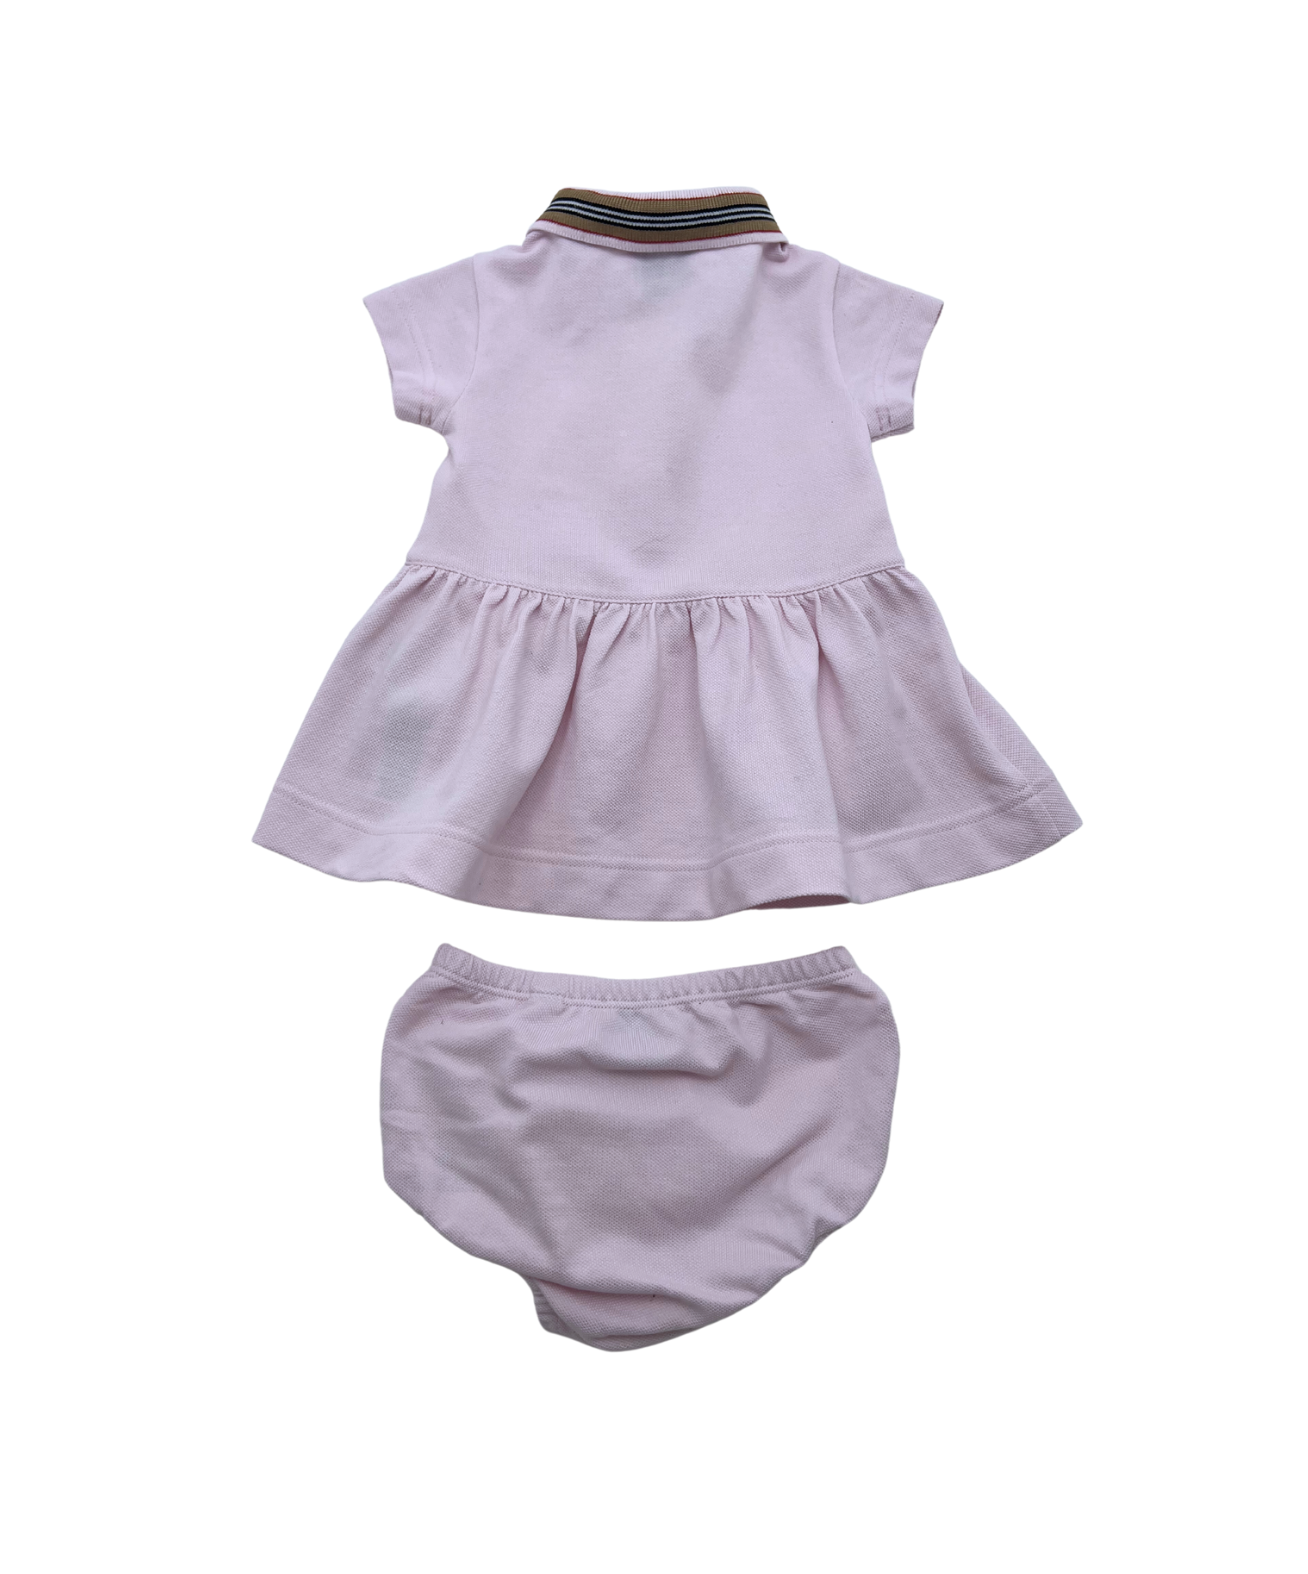 BURBERRY - Pink dress &amp; bloomers - 3 months